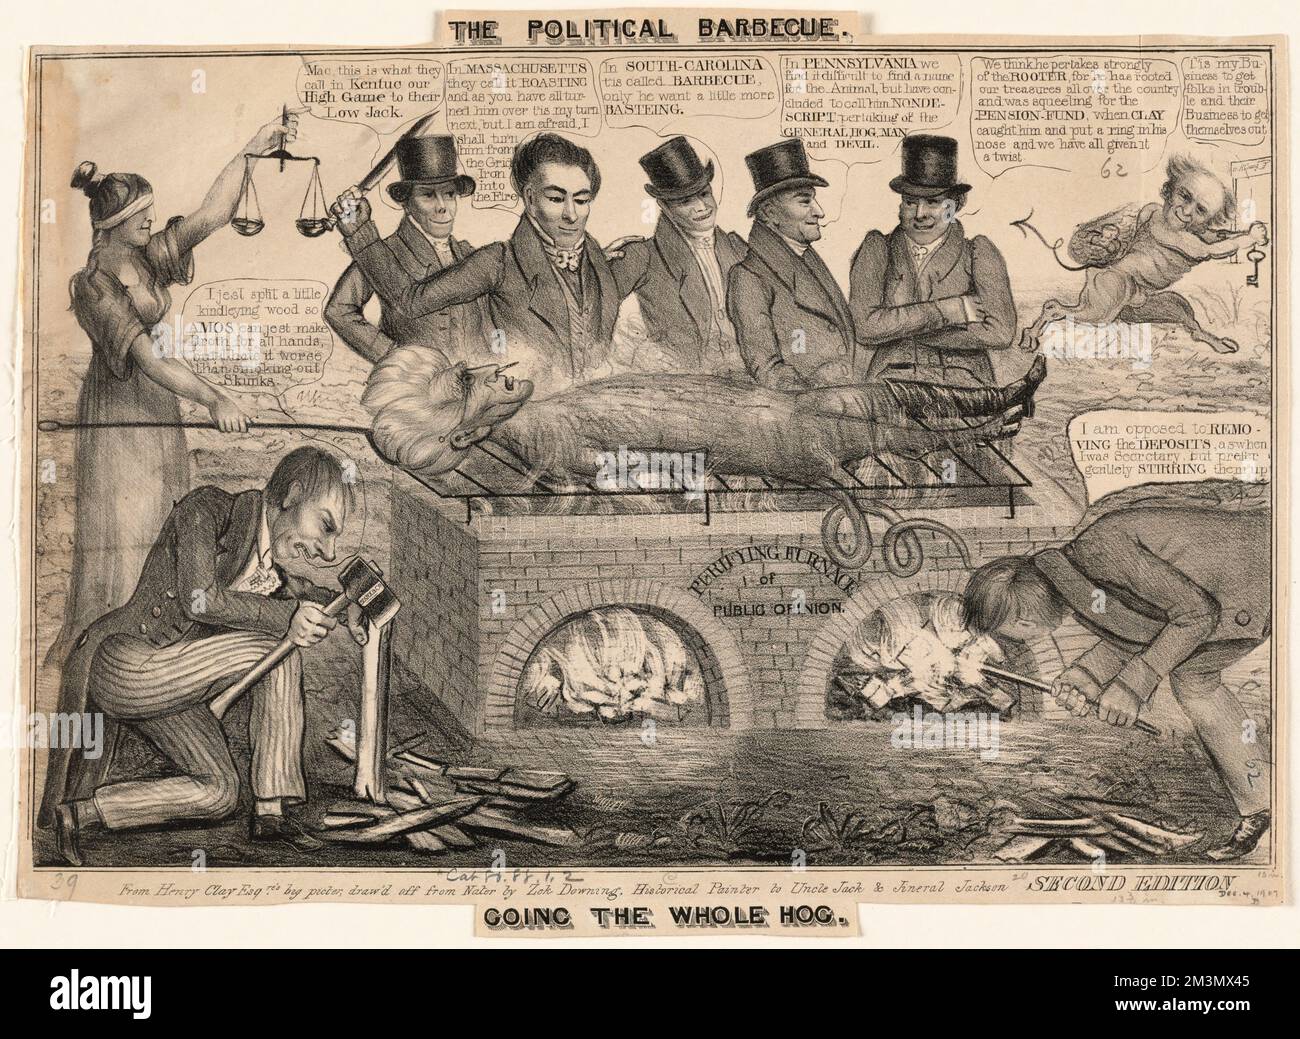 The political barbecue. Going the whole hog. , Public opinion, Furnaces, Economic policy, Presidents, Jackson, Andrew, 1767-1845, Van Buren, Martin, 1782-1862, Clay, Henry, 1777-1852, Duane, William J. William John, 1780-1865, Preston, William Ballard, 1805-1862, Webster, Daniel, 1782-1852, Bank of the United States 1816-1836 Stock Photo